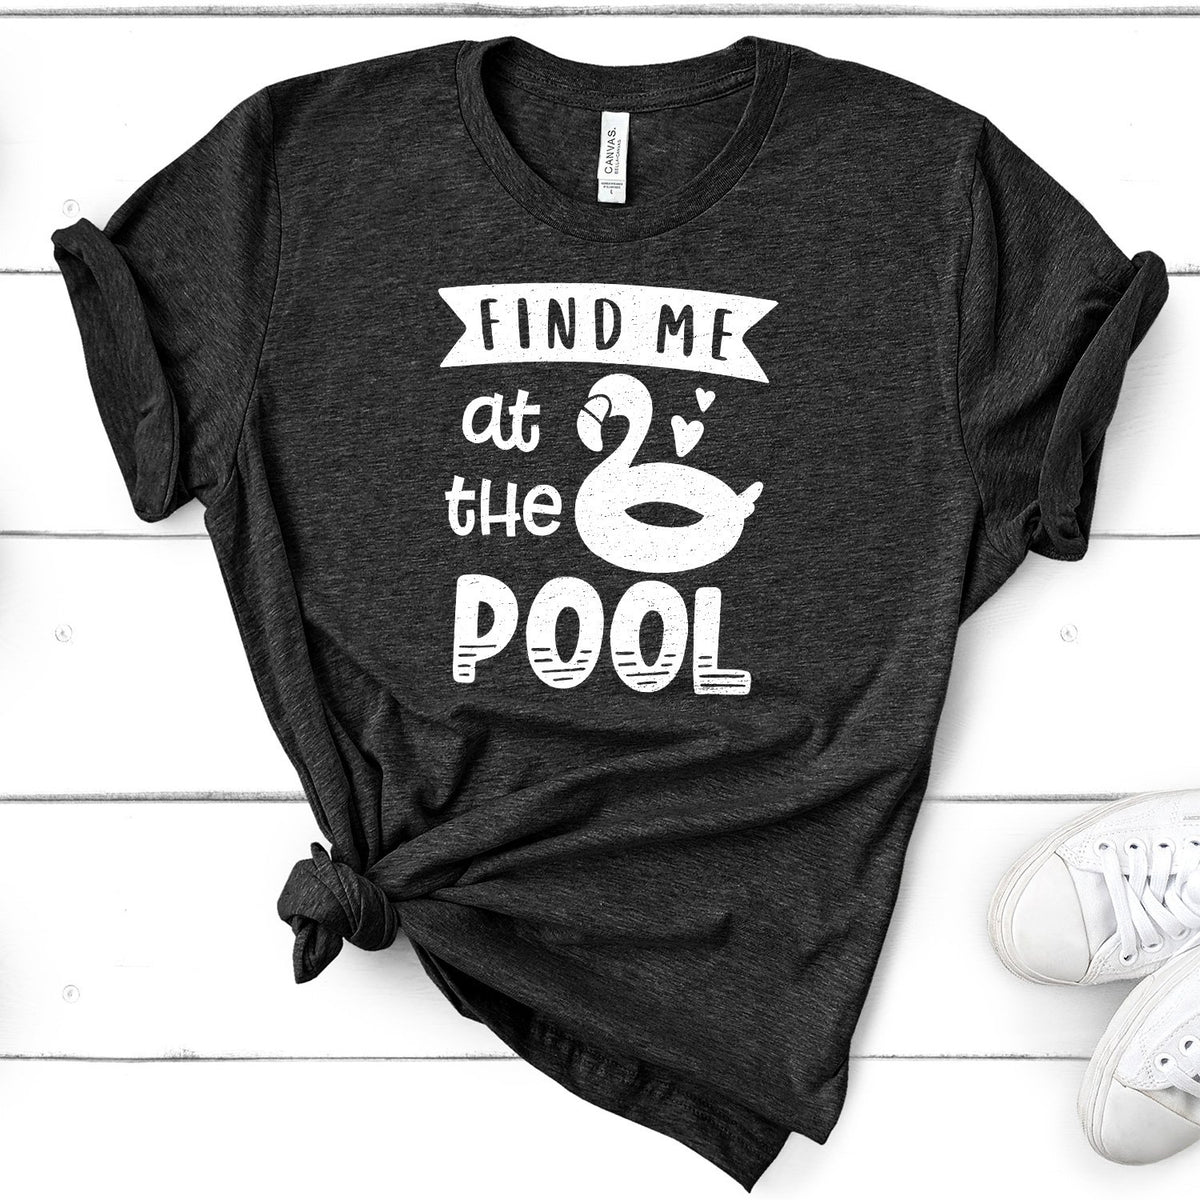 Find Me At The Pool - Short Sleeve Tee Shirt